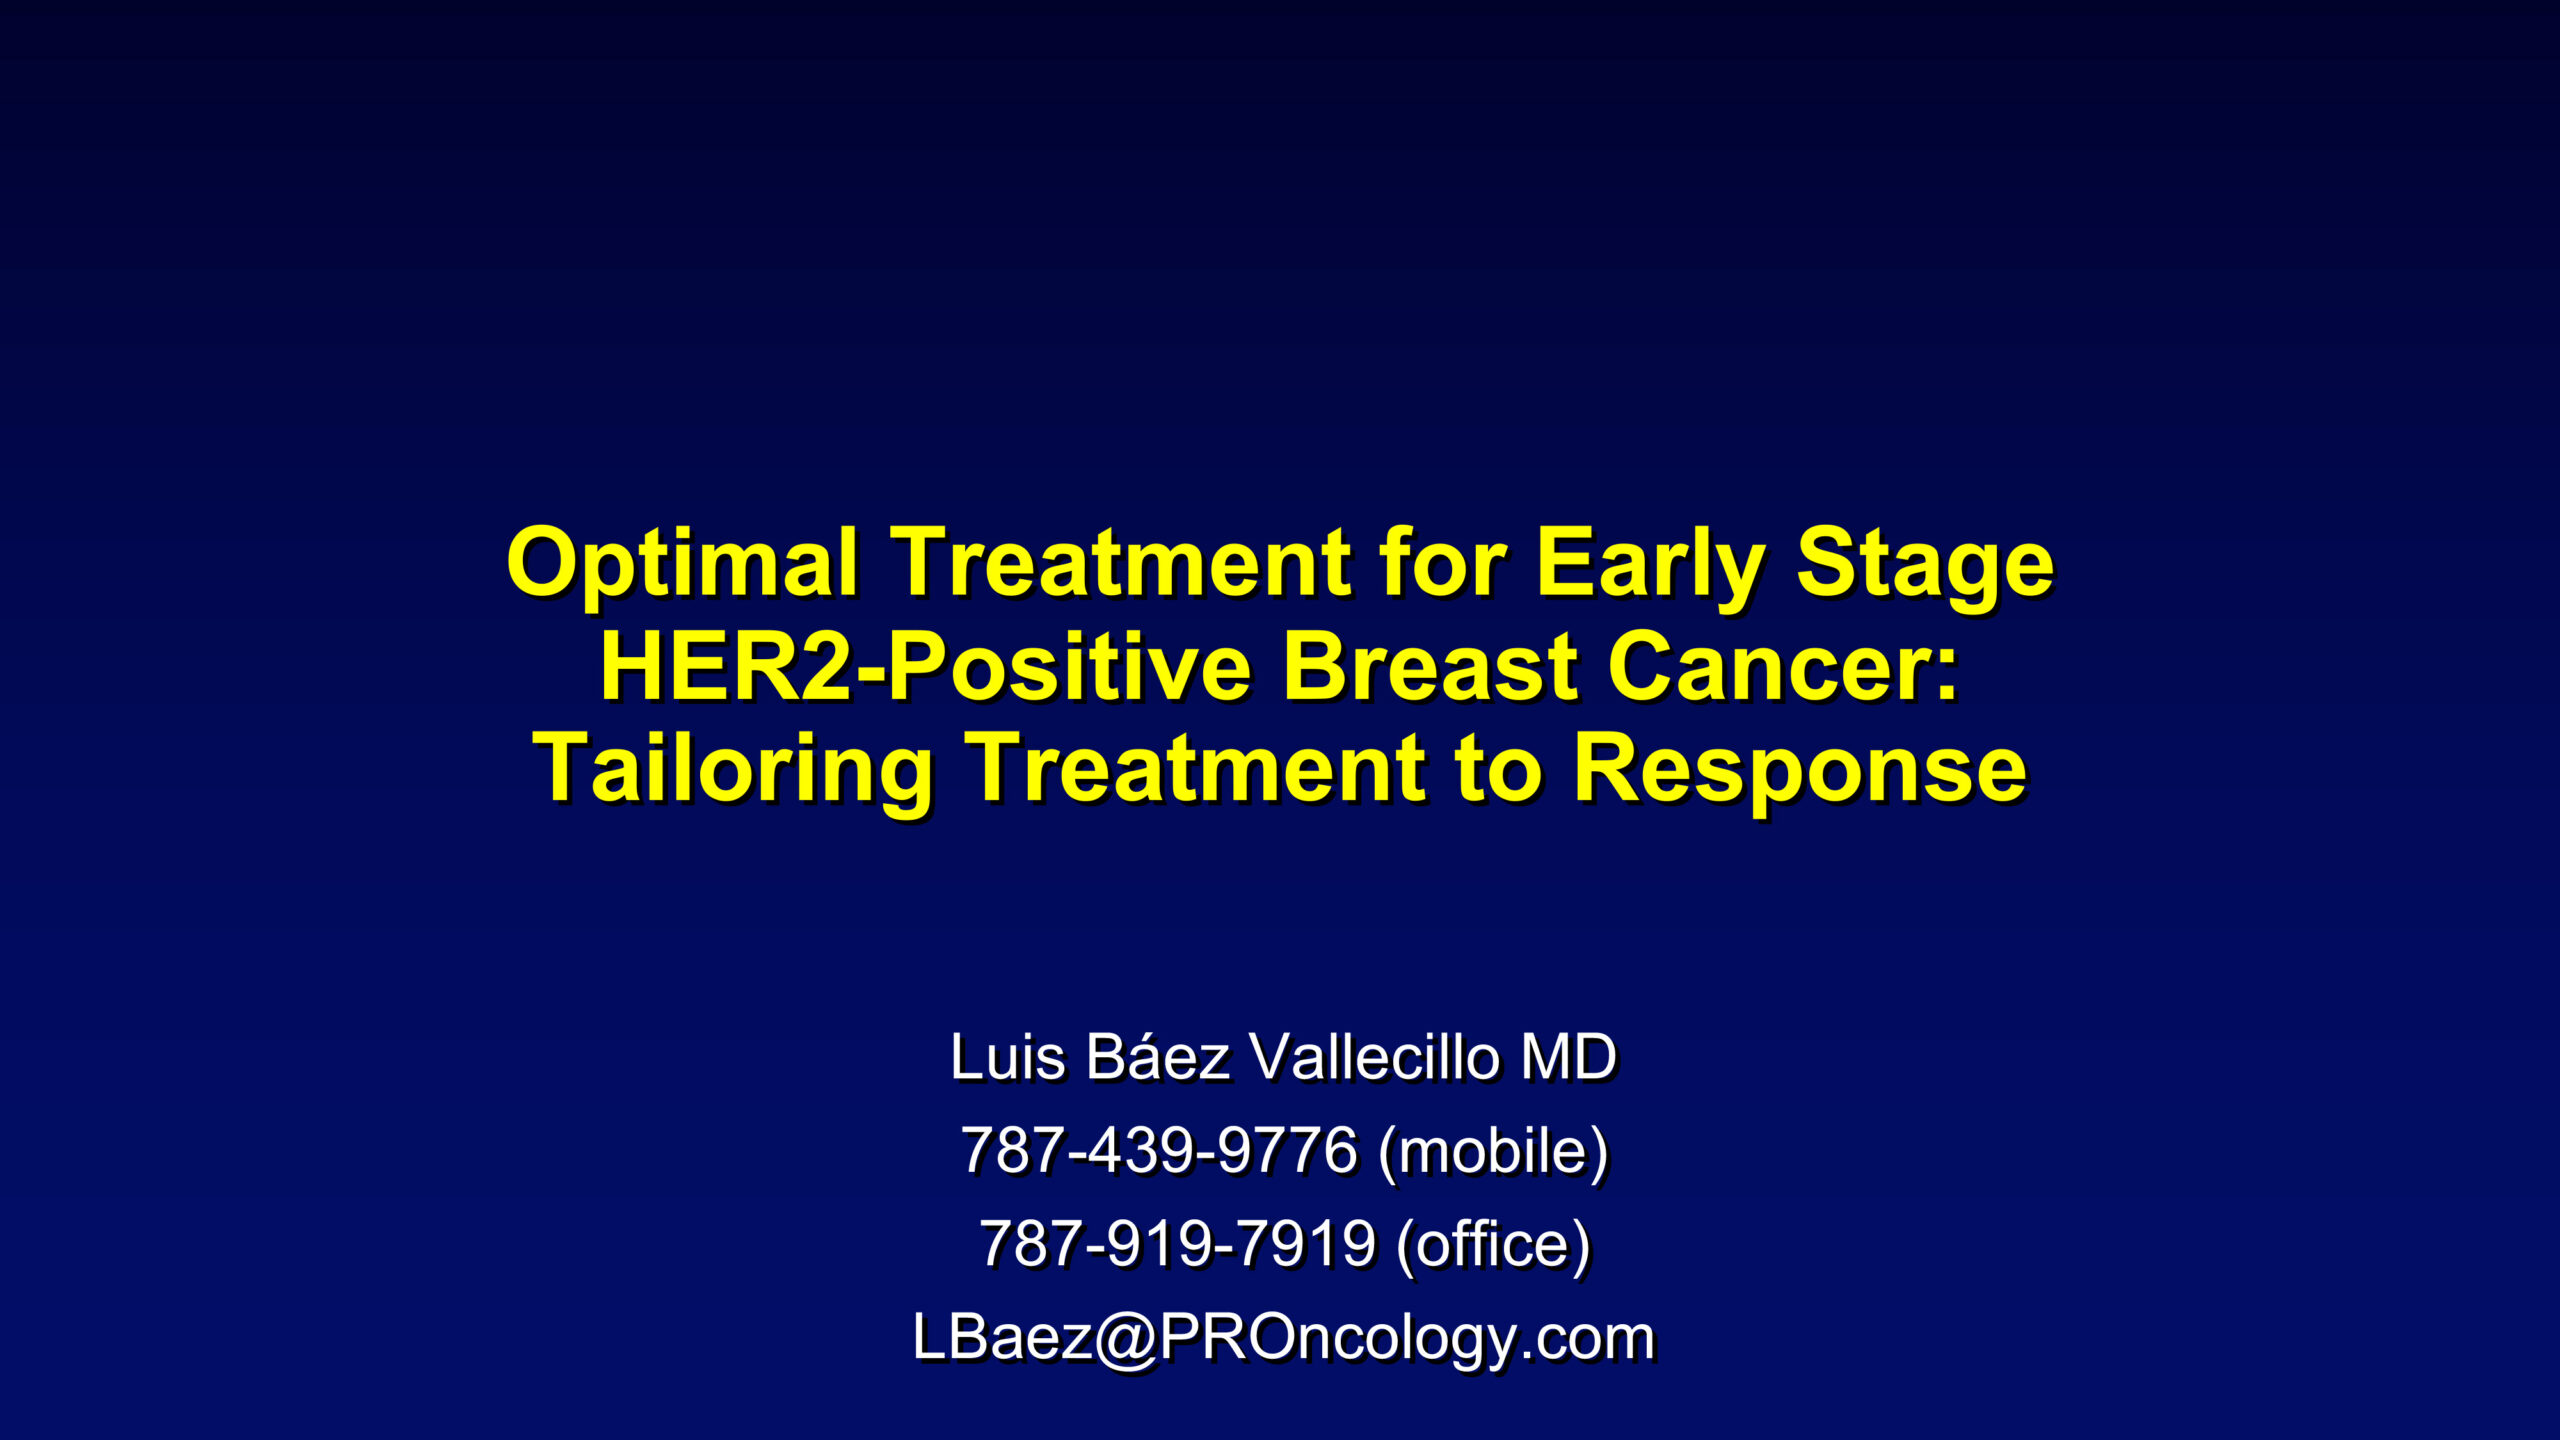 Optimal Treatment for Early Stage HER2 Positive Breast Cancer: Tailoring Treatment to Response